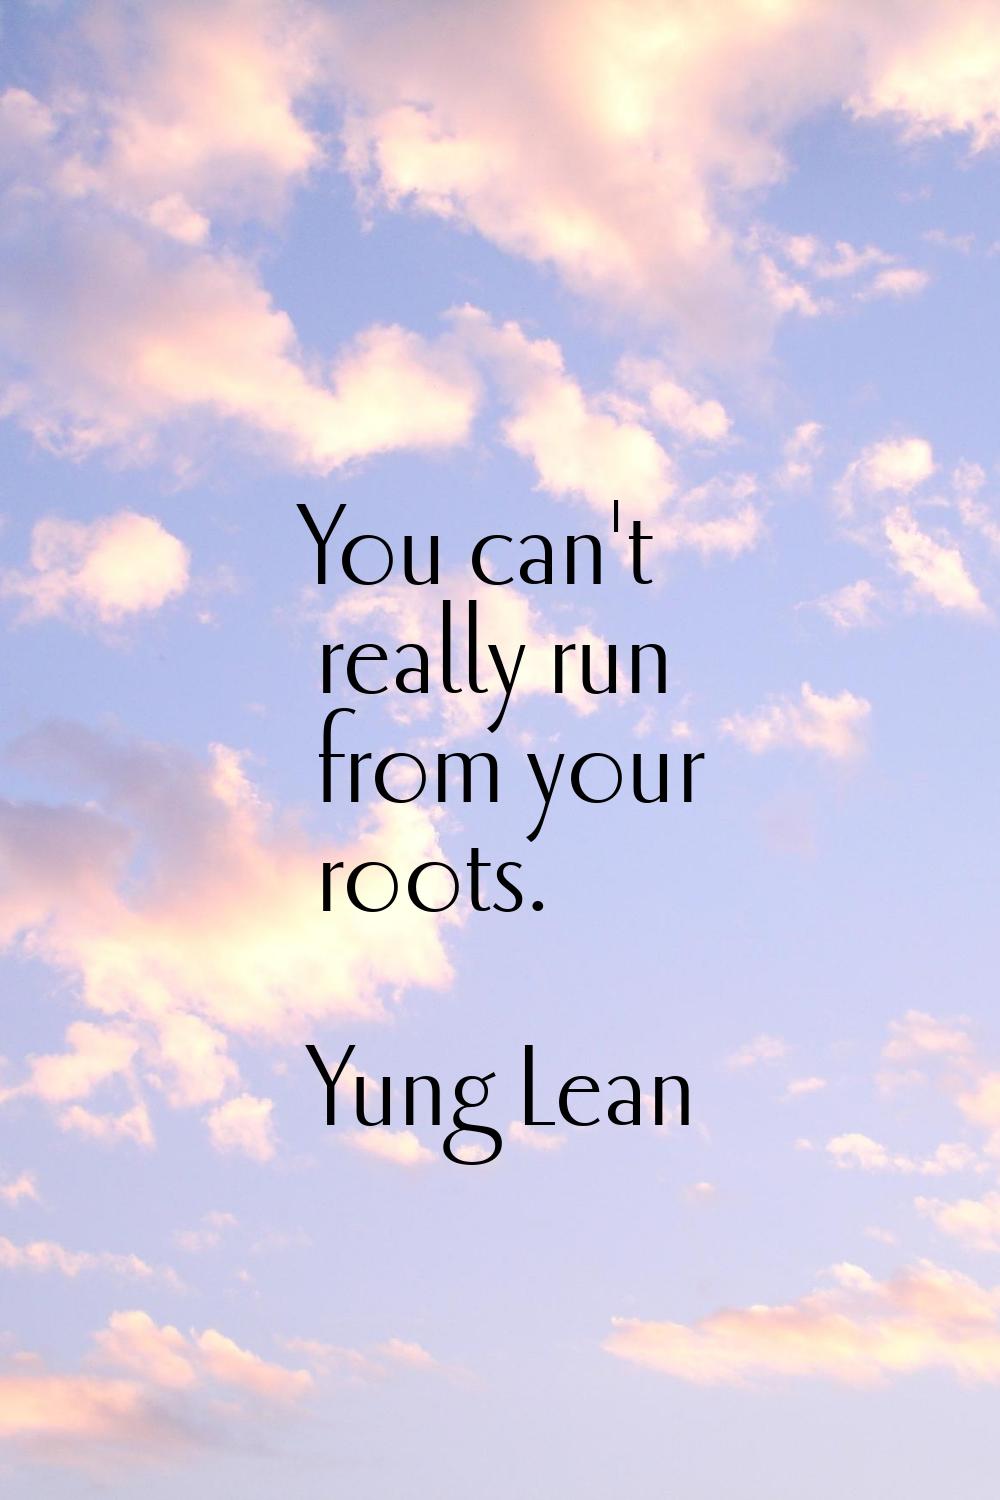 You can't really run from your roots.